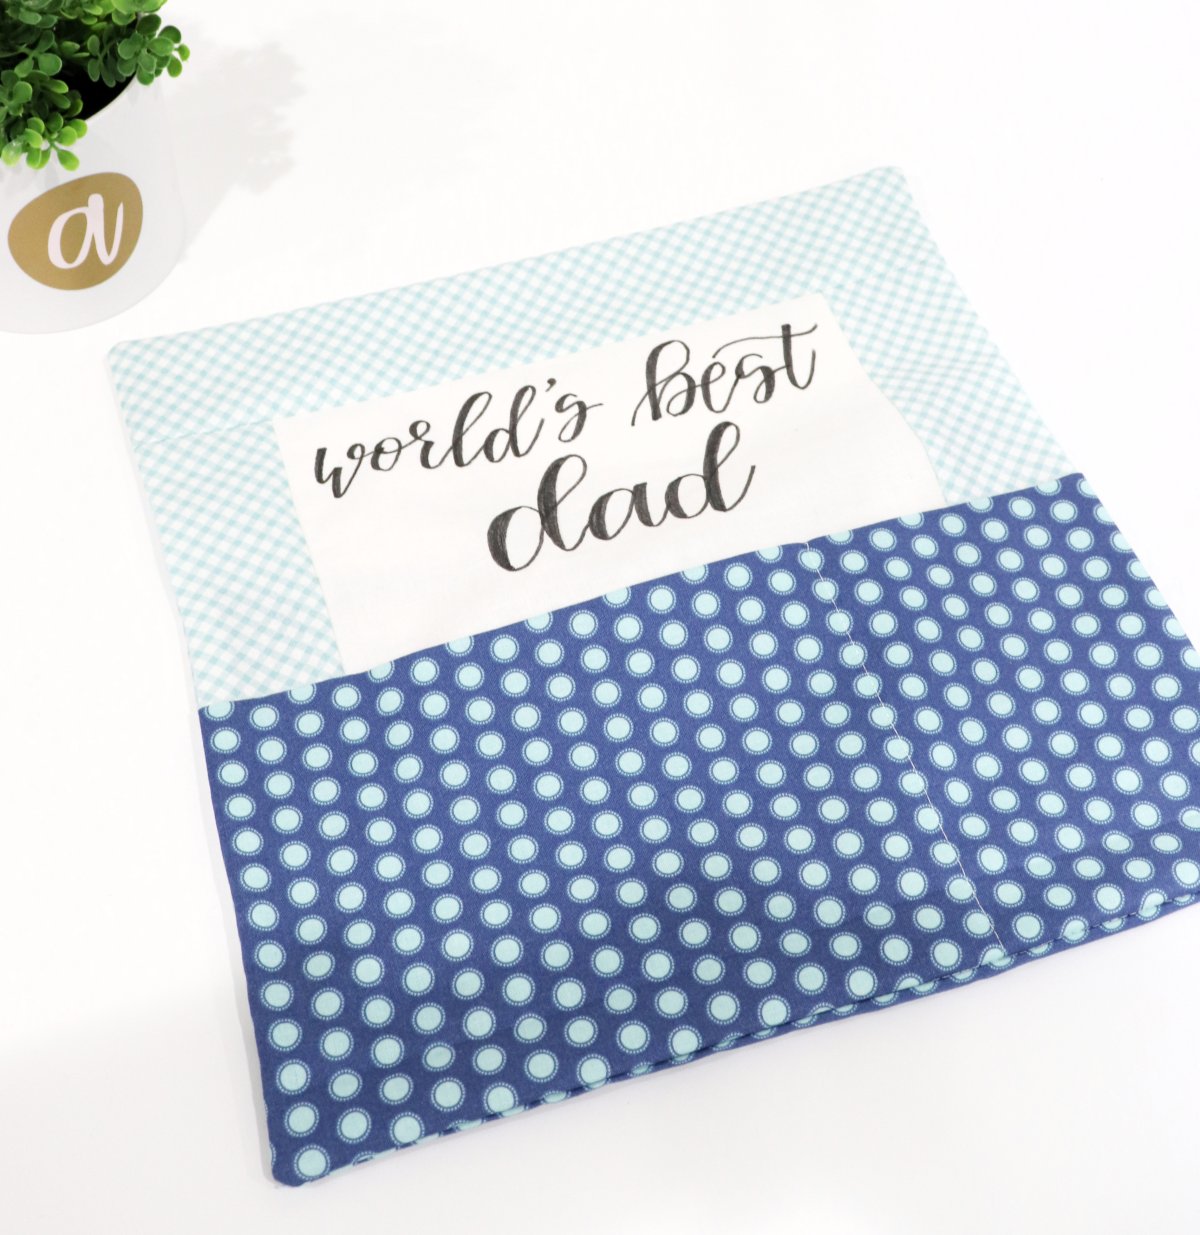 Image contains a pillow cover with a white center, light blue and white sashing, and a dark blue print pocket. The words “world’s best dad” are lettered in black fabric marker.